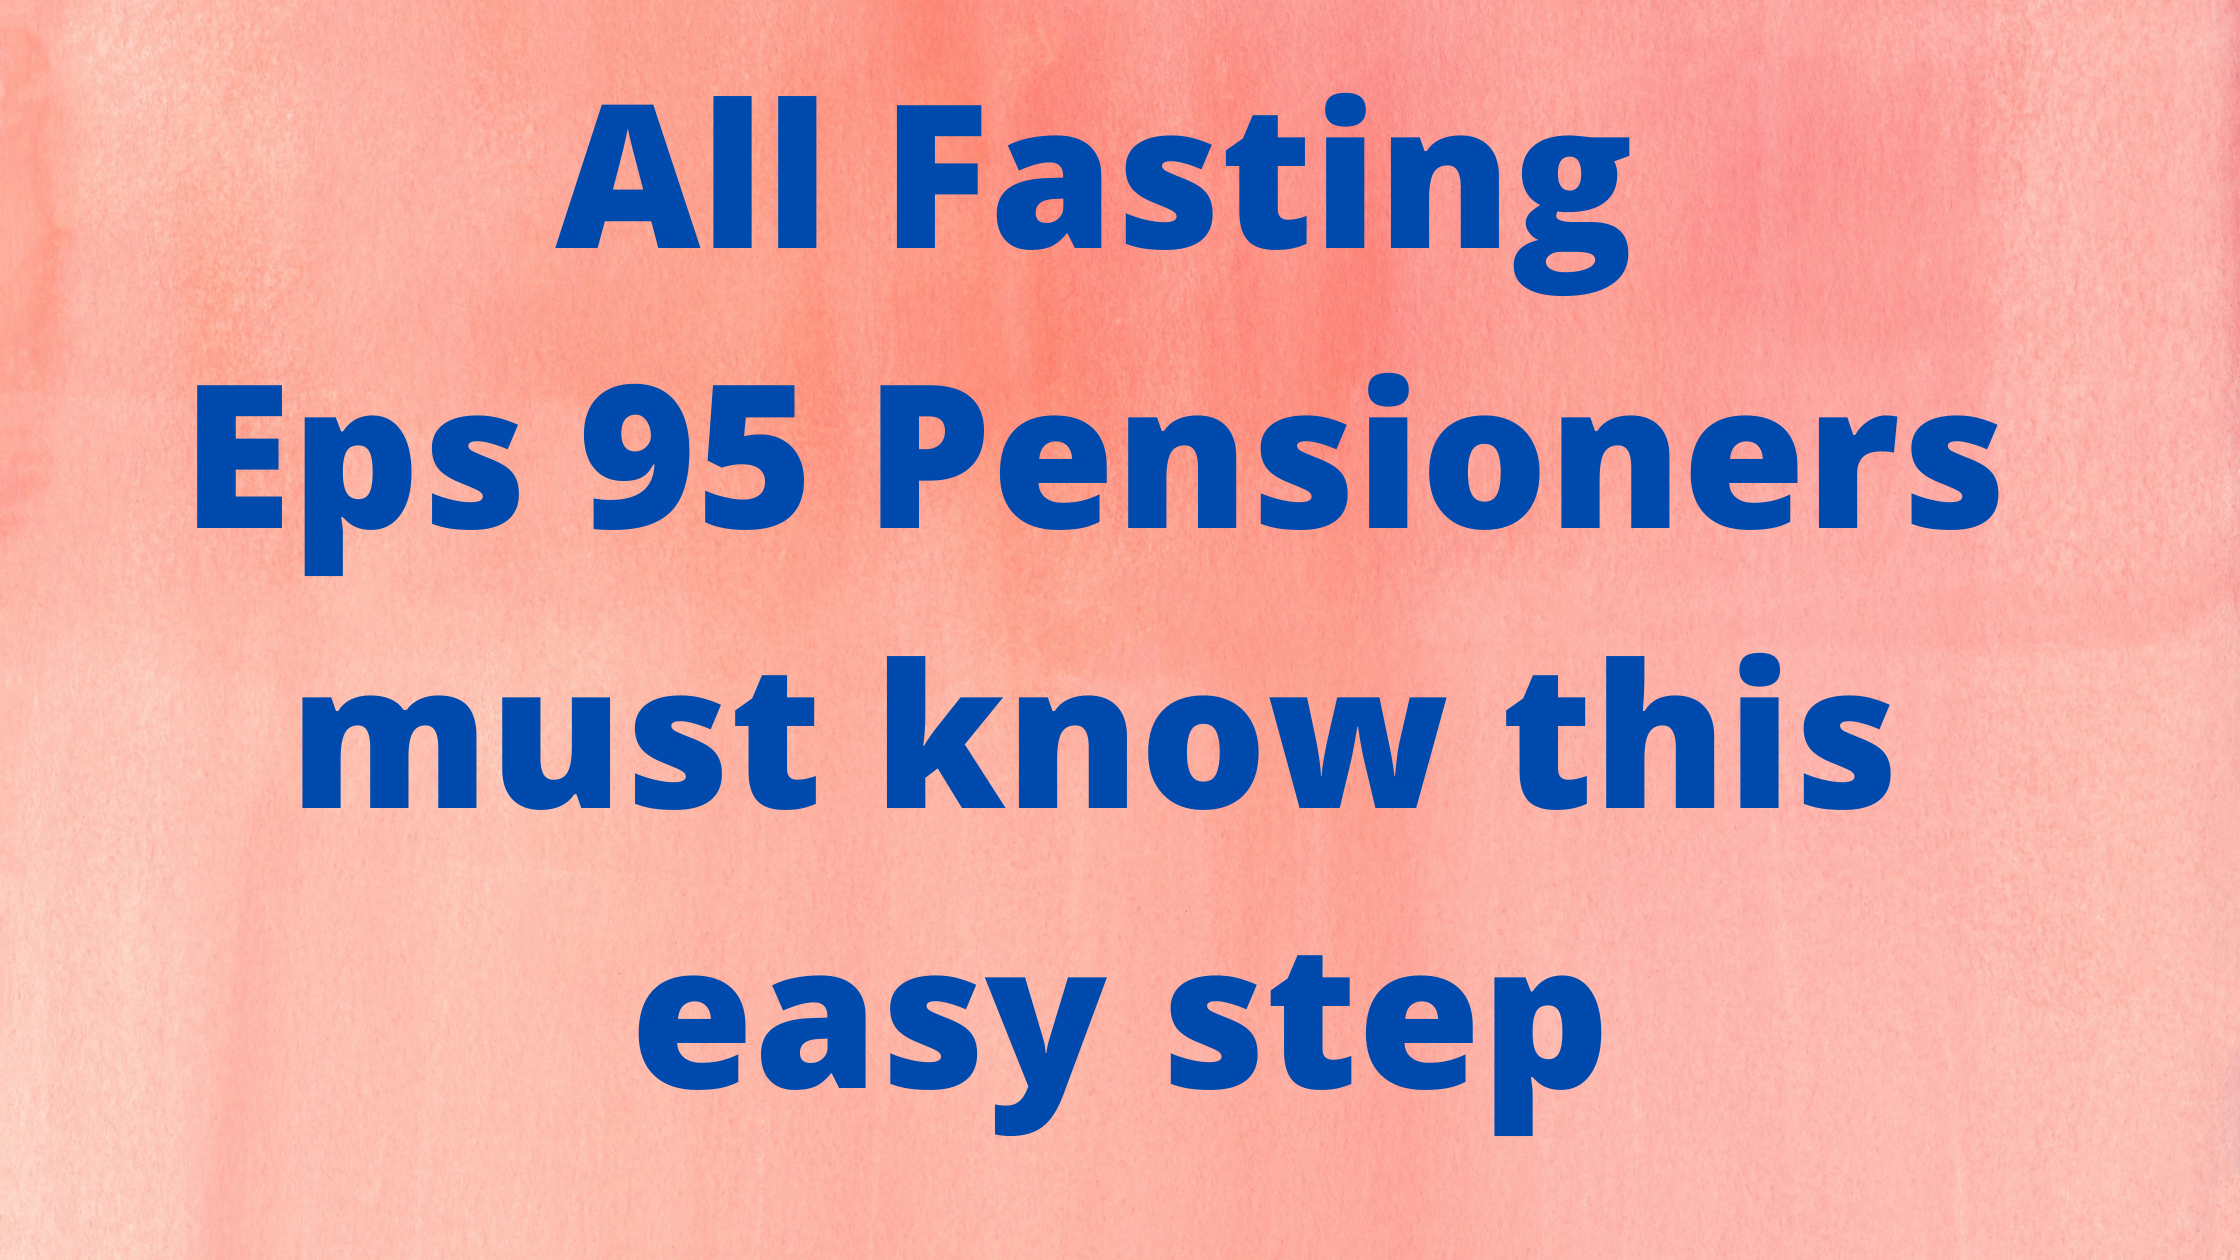 All Fasting Eps 95 Pensioners must know this easy step